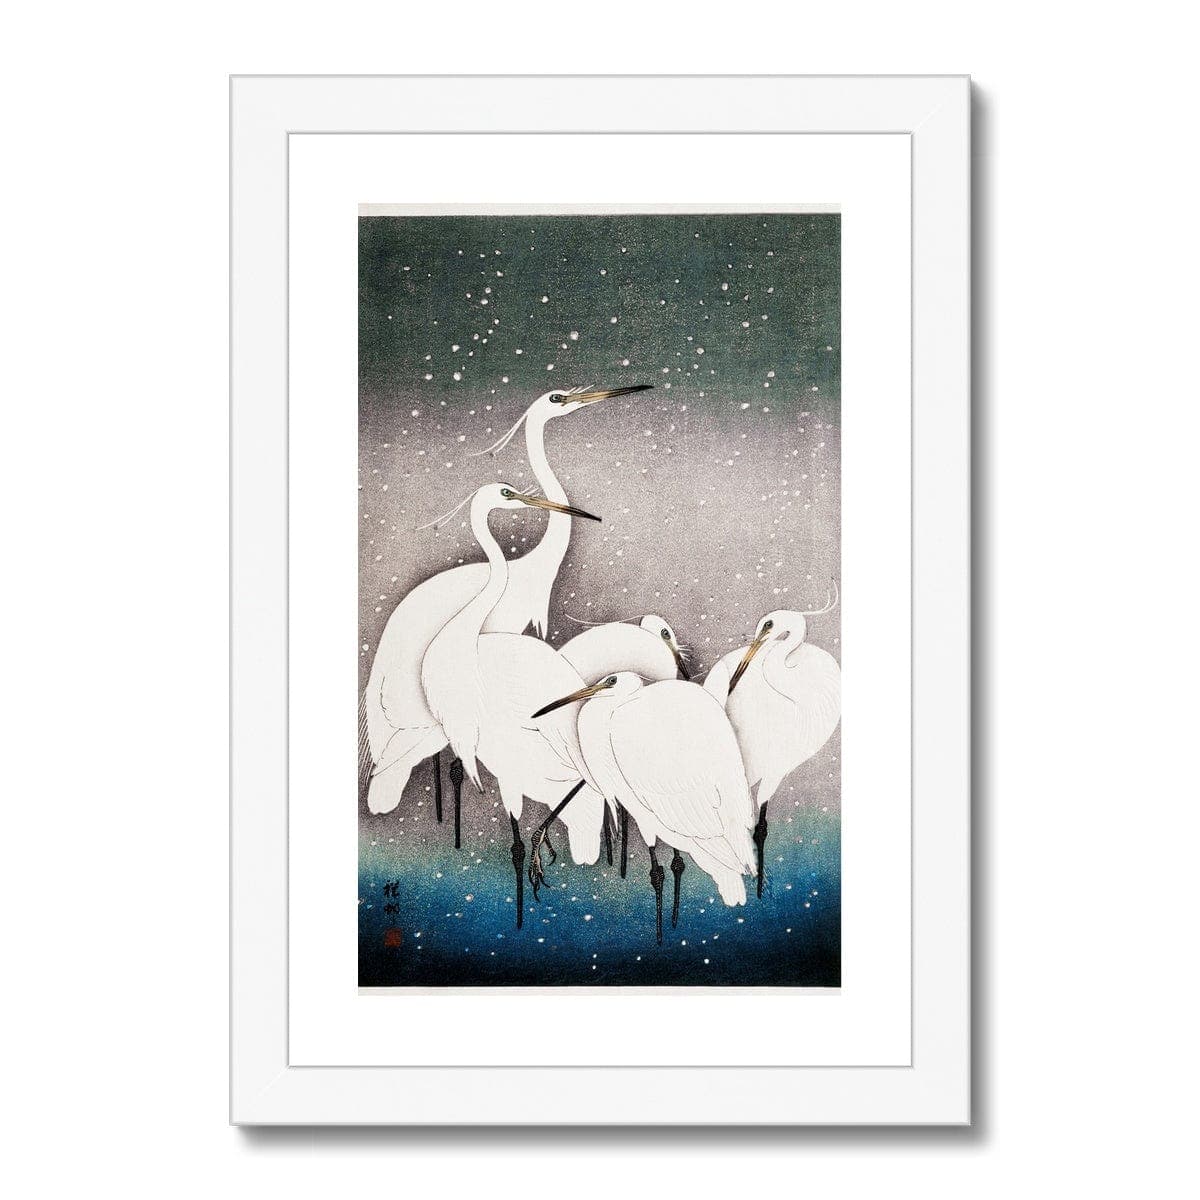 Group of Egrets (1925 - 1936) by Ohara Koson (1877-1945) Framed & Mounted Print